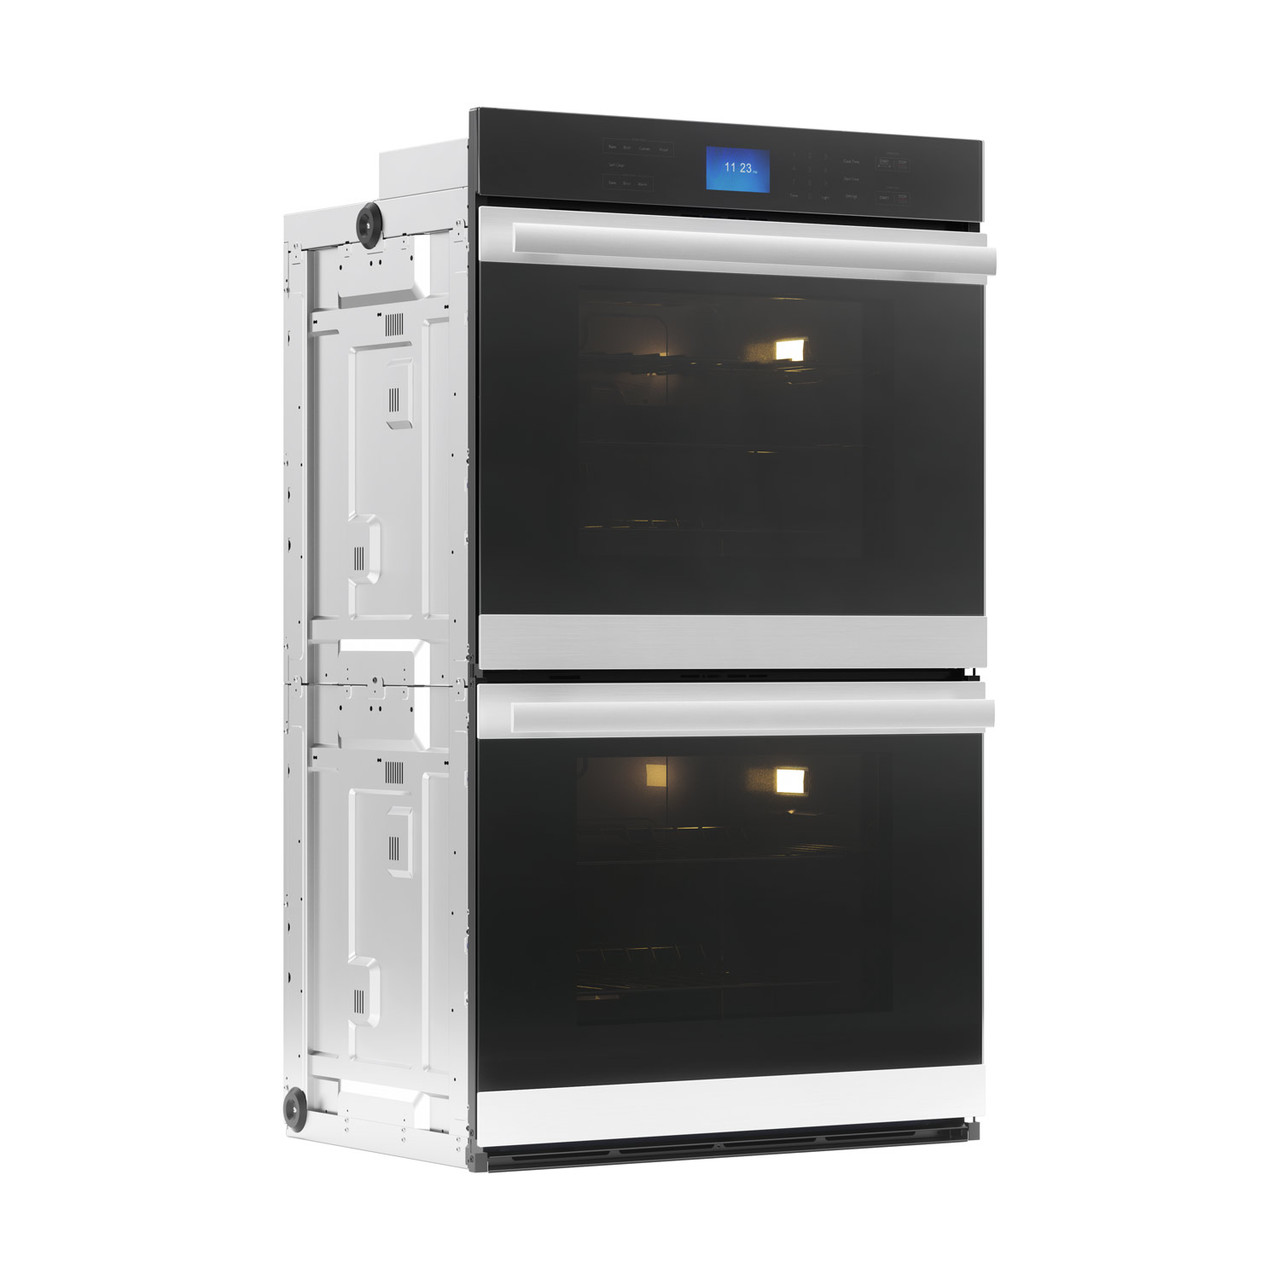 Sharp Built-In Double Wall Oven (SWB3062GS) Right Angle View